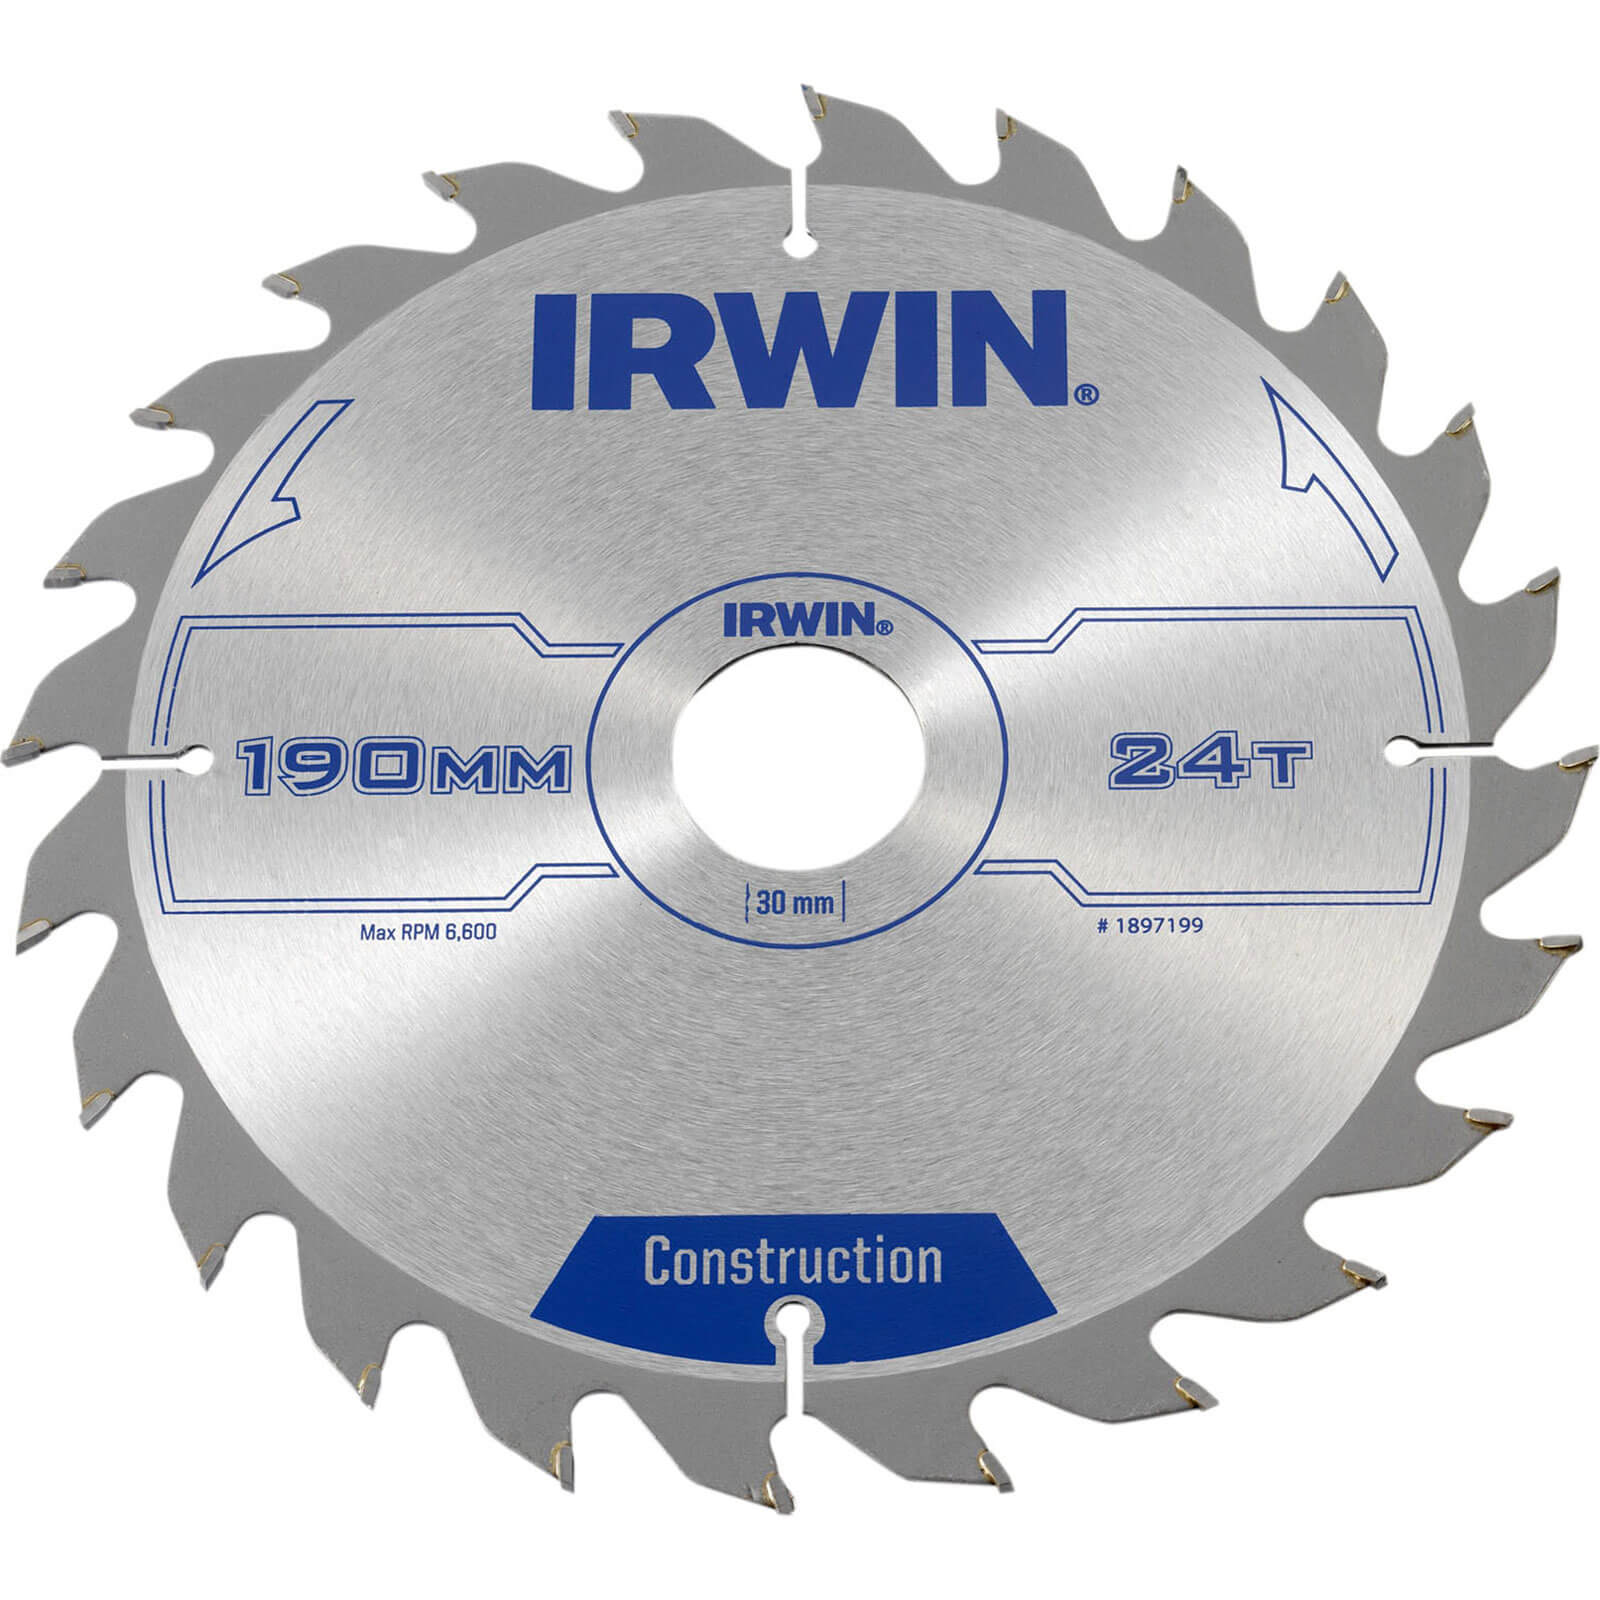 Image of Irwin ATB Construction Circular Saw Blade 190mm 24T 30mm